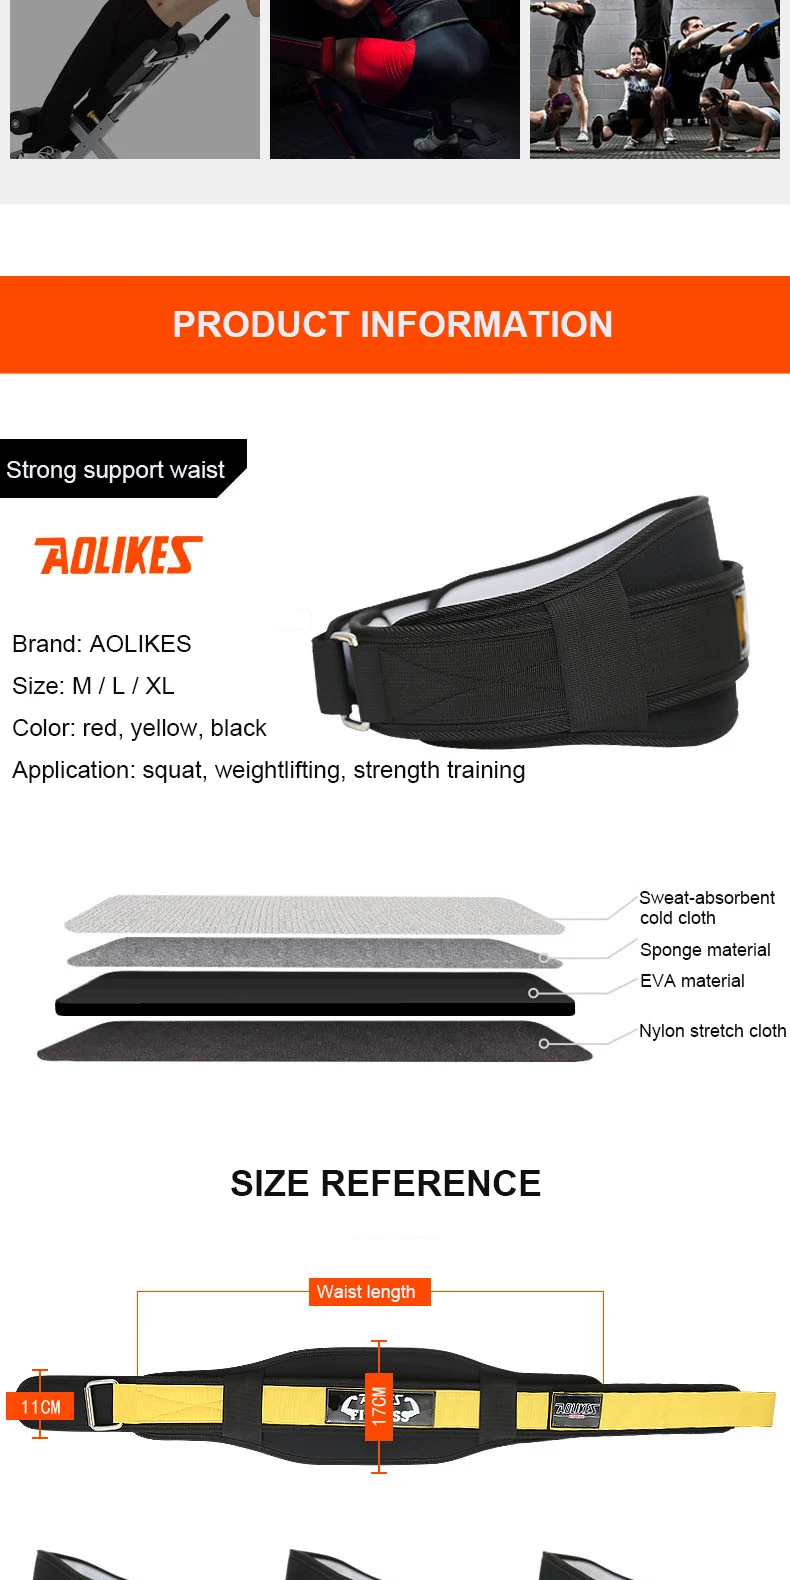 Man Nylon Fitness Weight Lifting Squat Belt Safety Gym Waist Suppport Training Belt Back Supporting Protect Lumbar Power